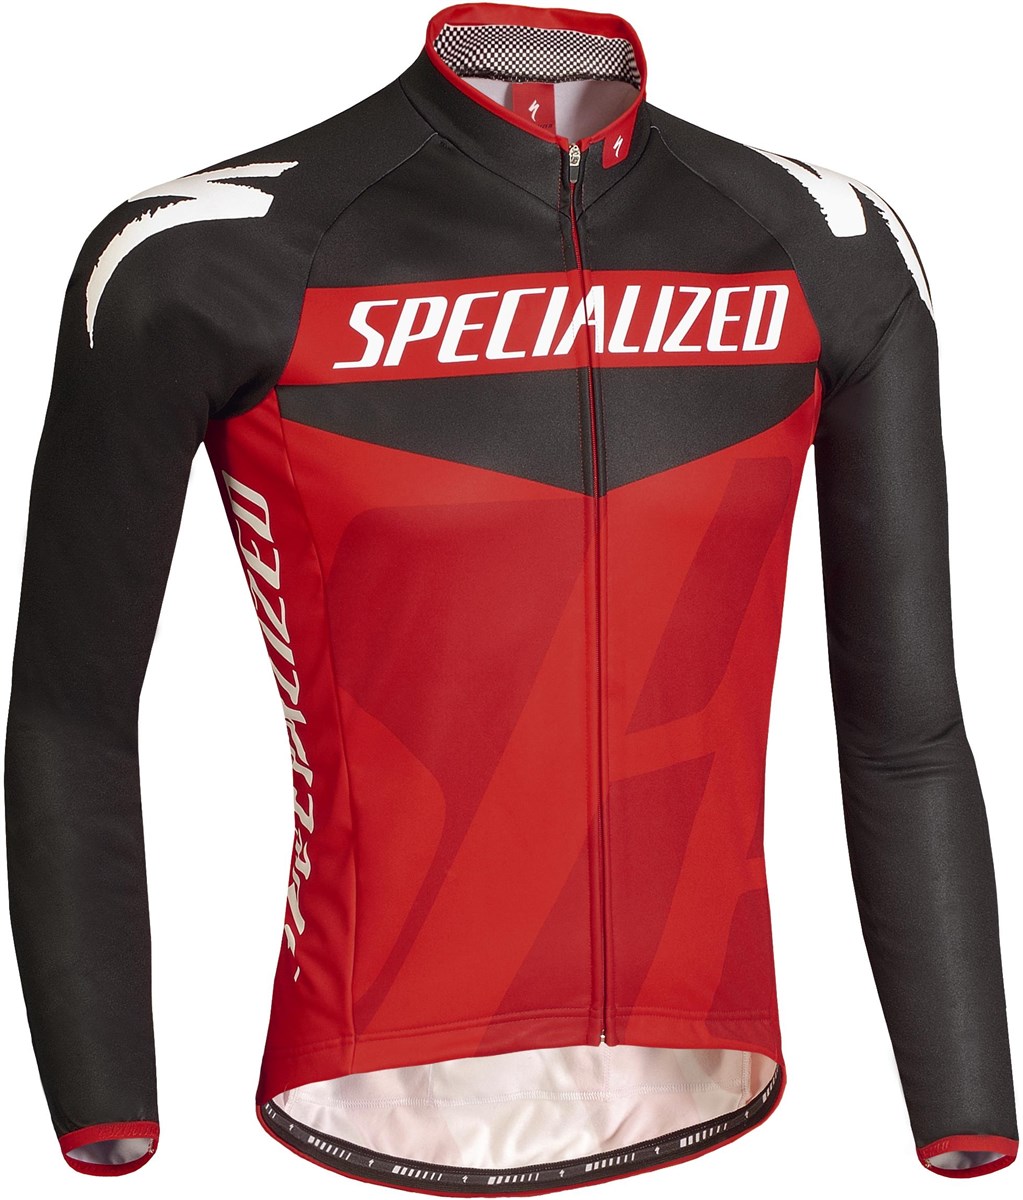 Specialized Pro Racing Long Sleeve Cycling Jersey product image